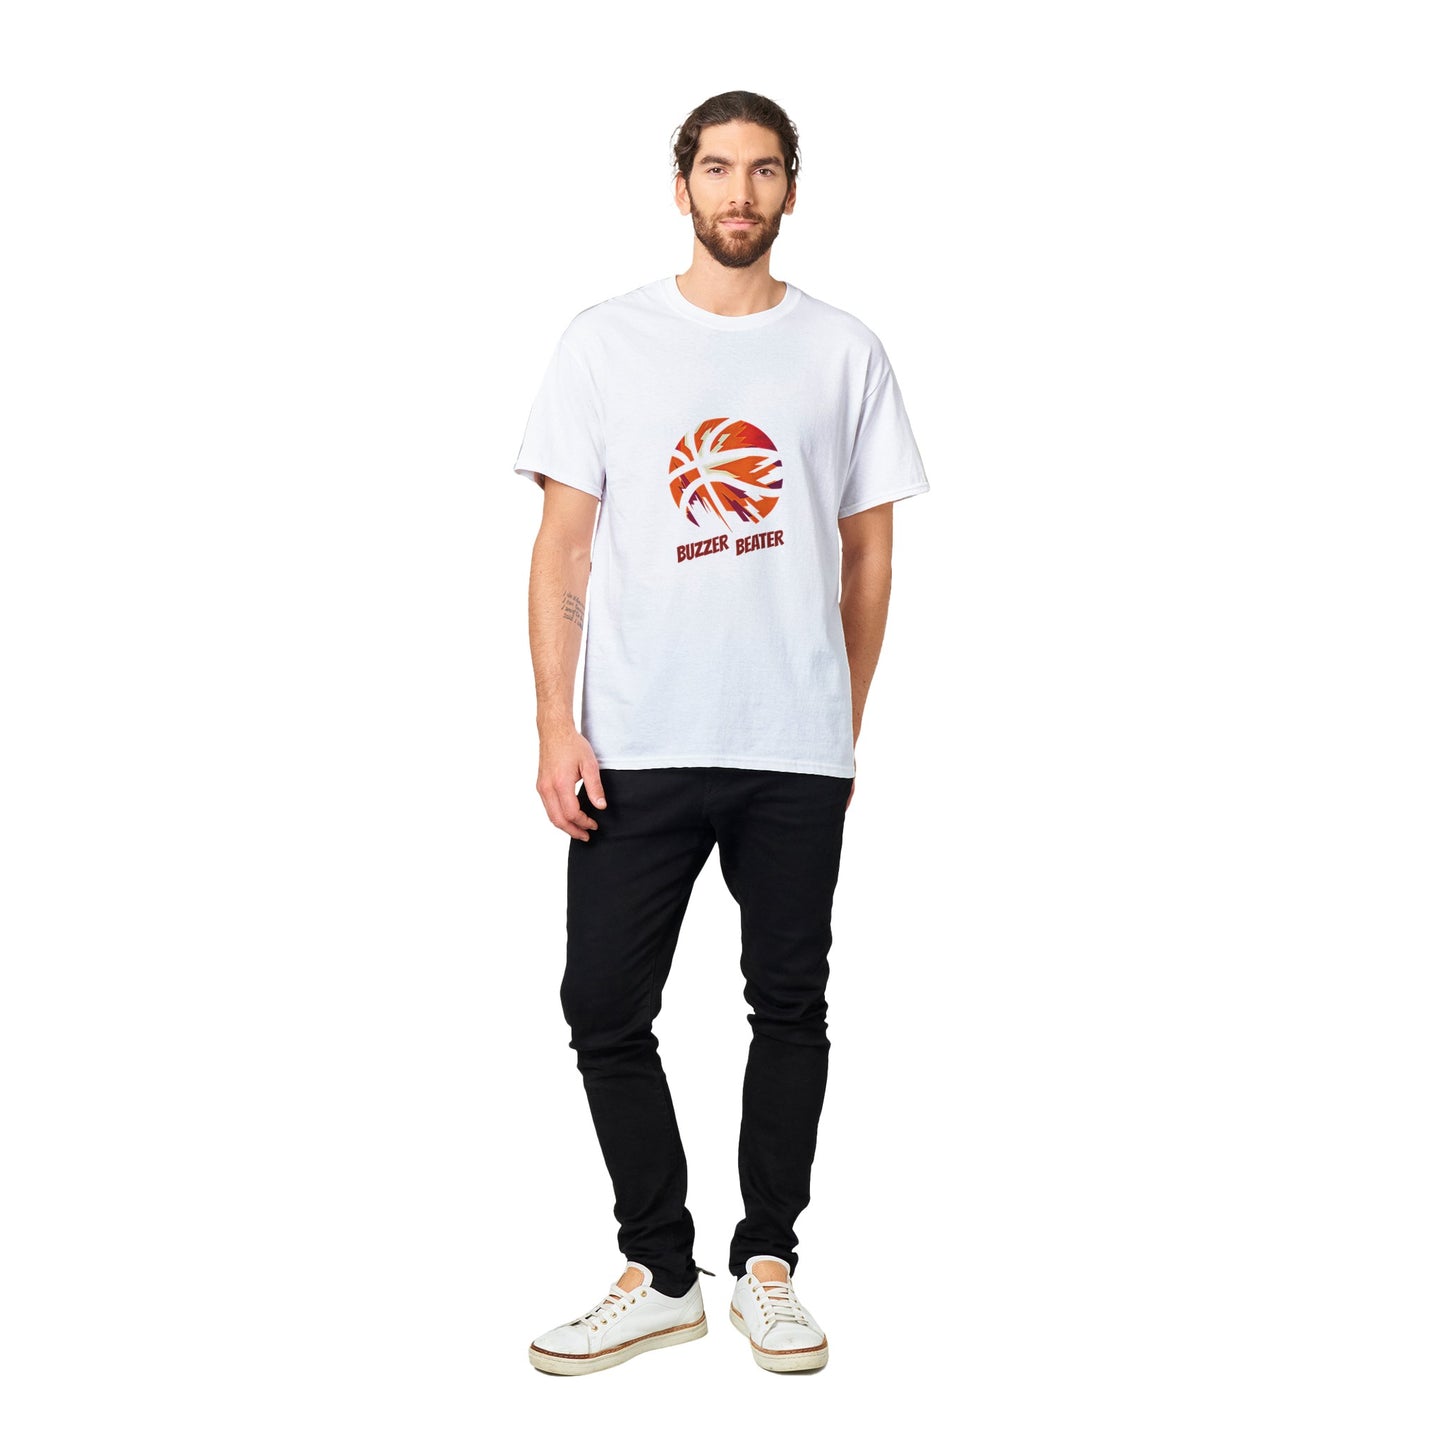 Buzzer Beater - Game On Collection - Unisex Crewneck T-shirt